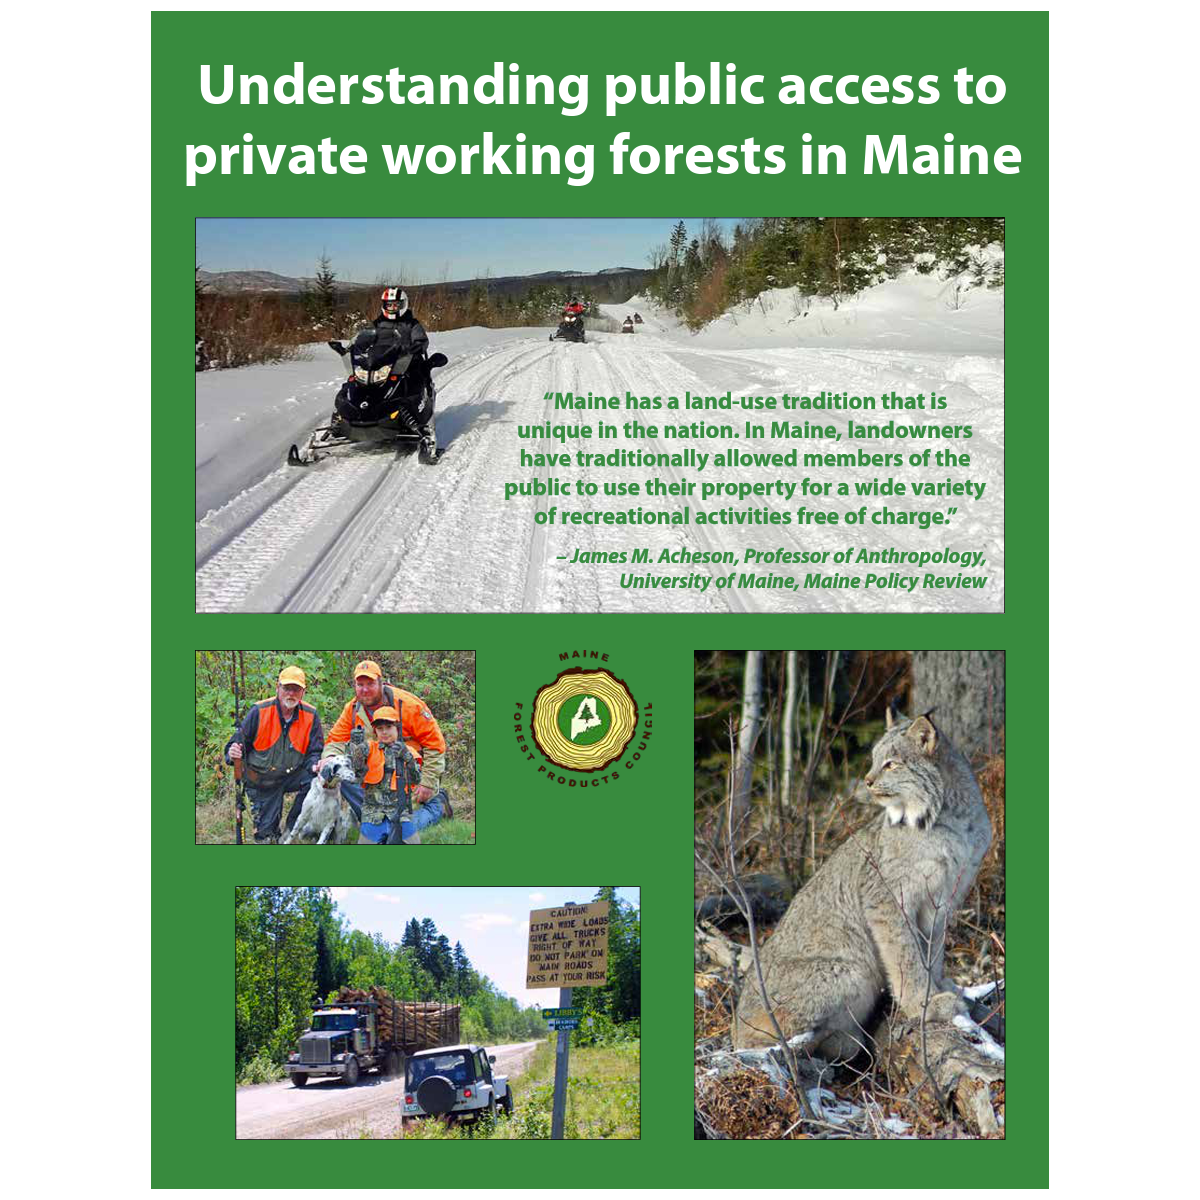 Understanding public access to private working forests in Maine